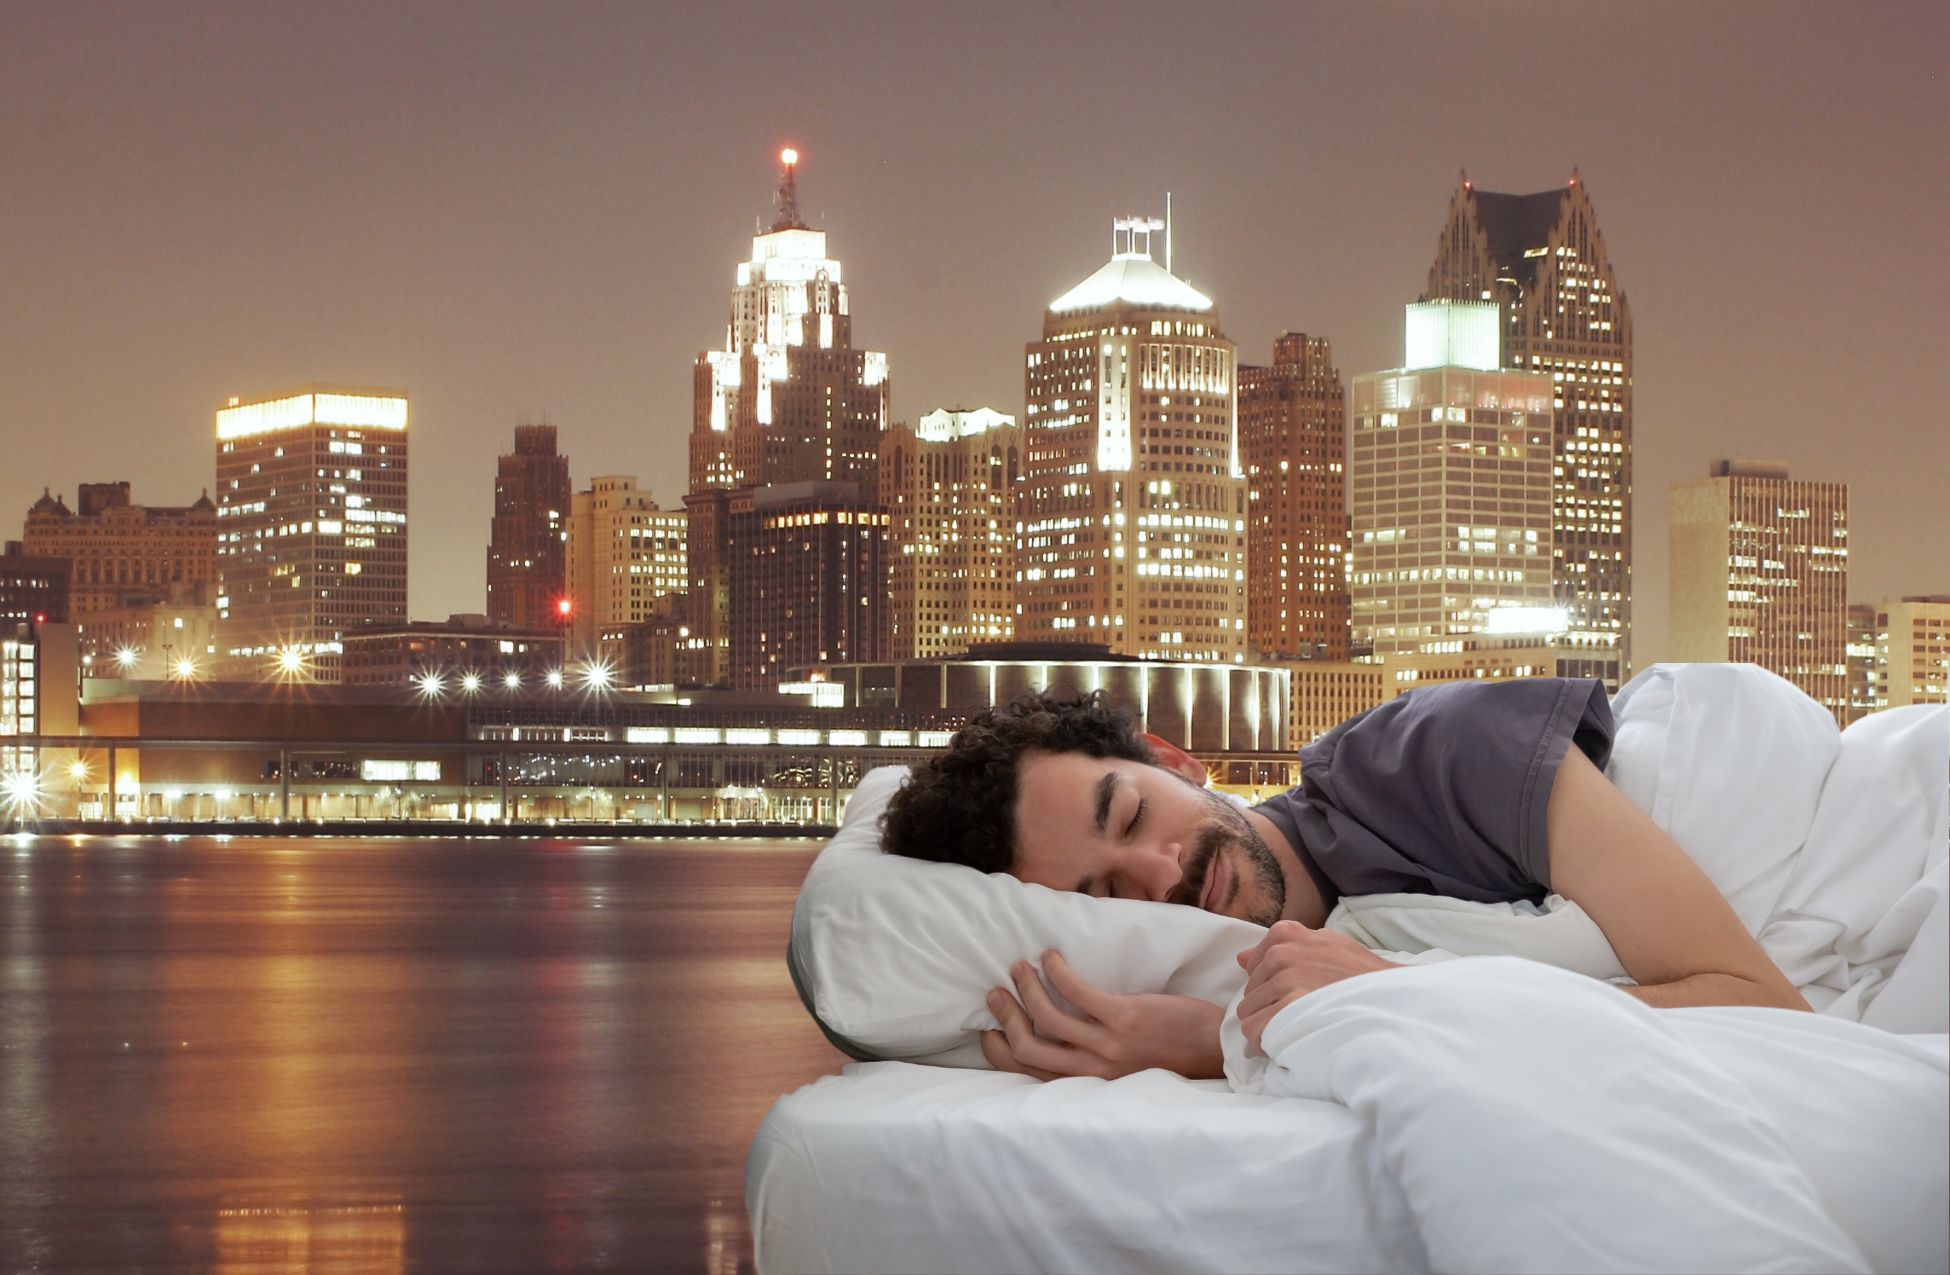 The 14 Best Hotels In Detroit: Top Gems For Exciting Stays!